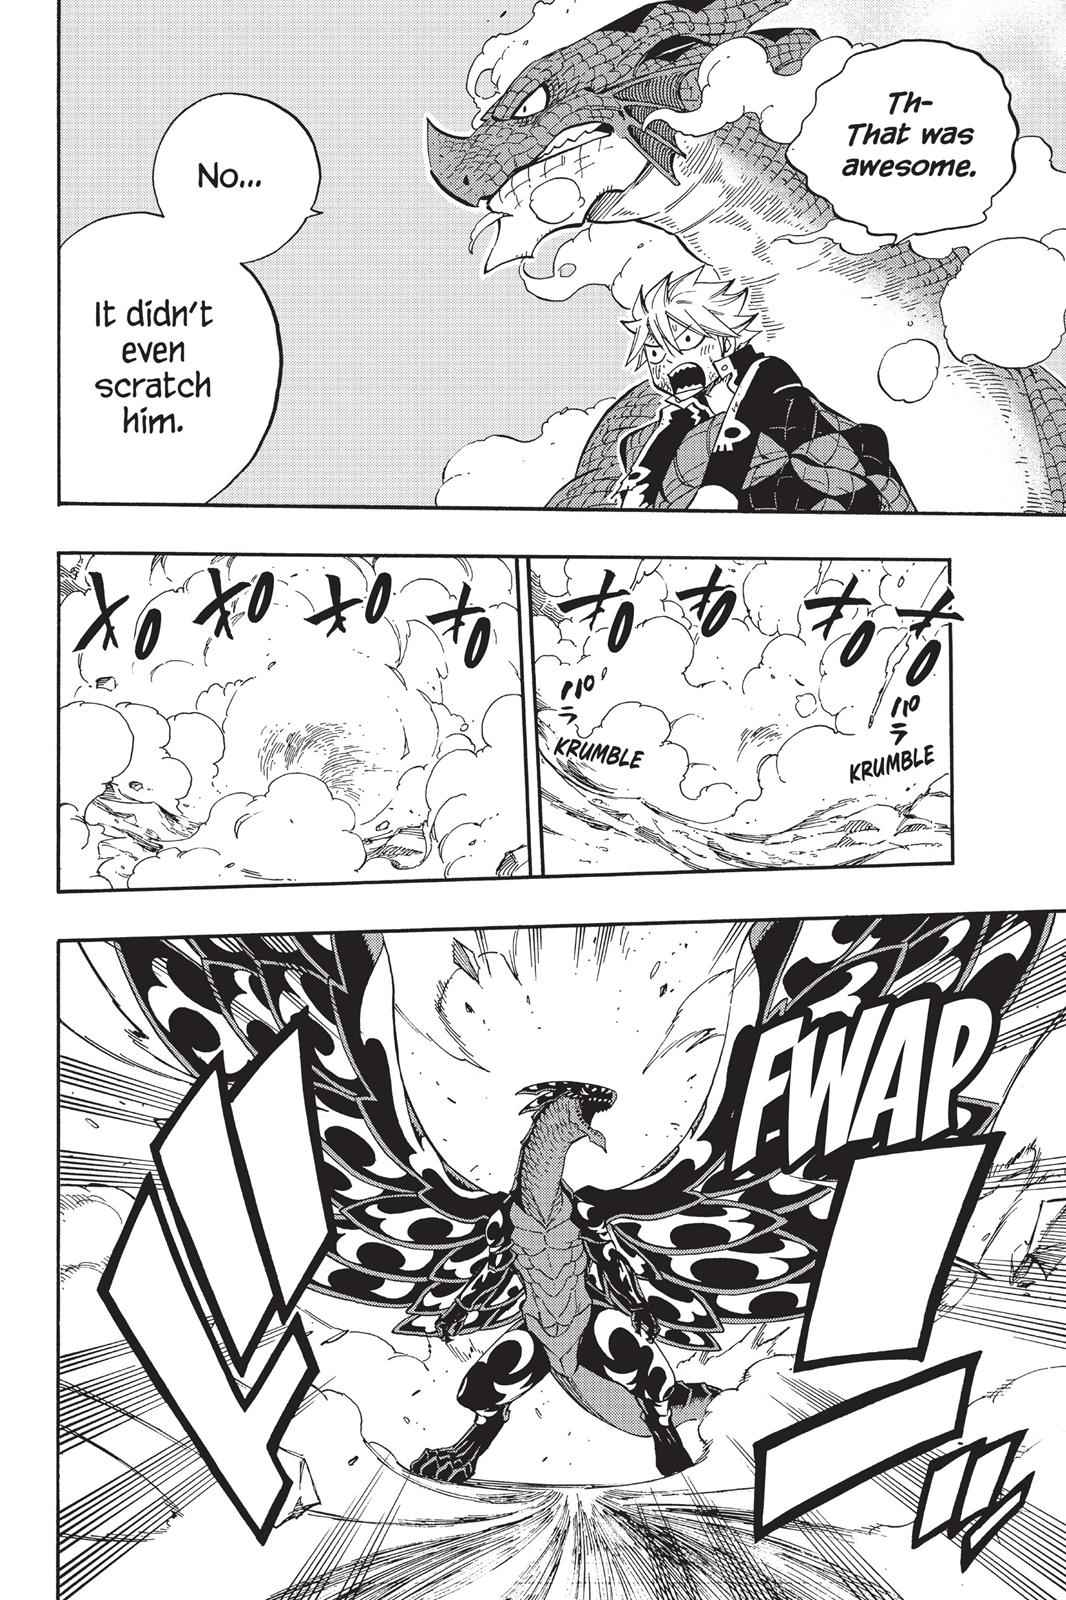  Chapter 401 image 012